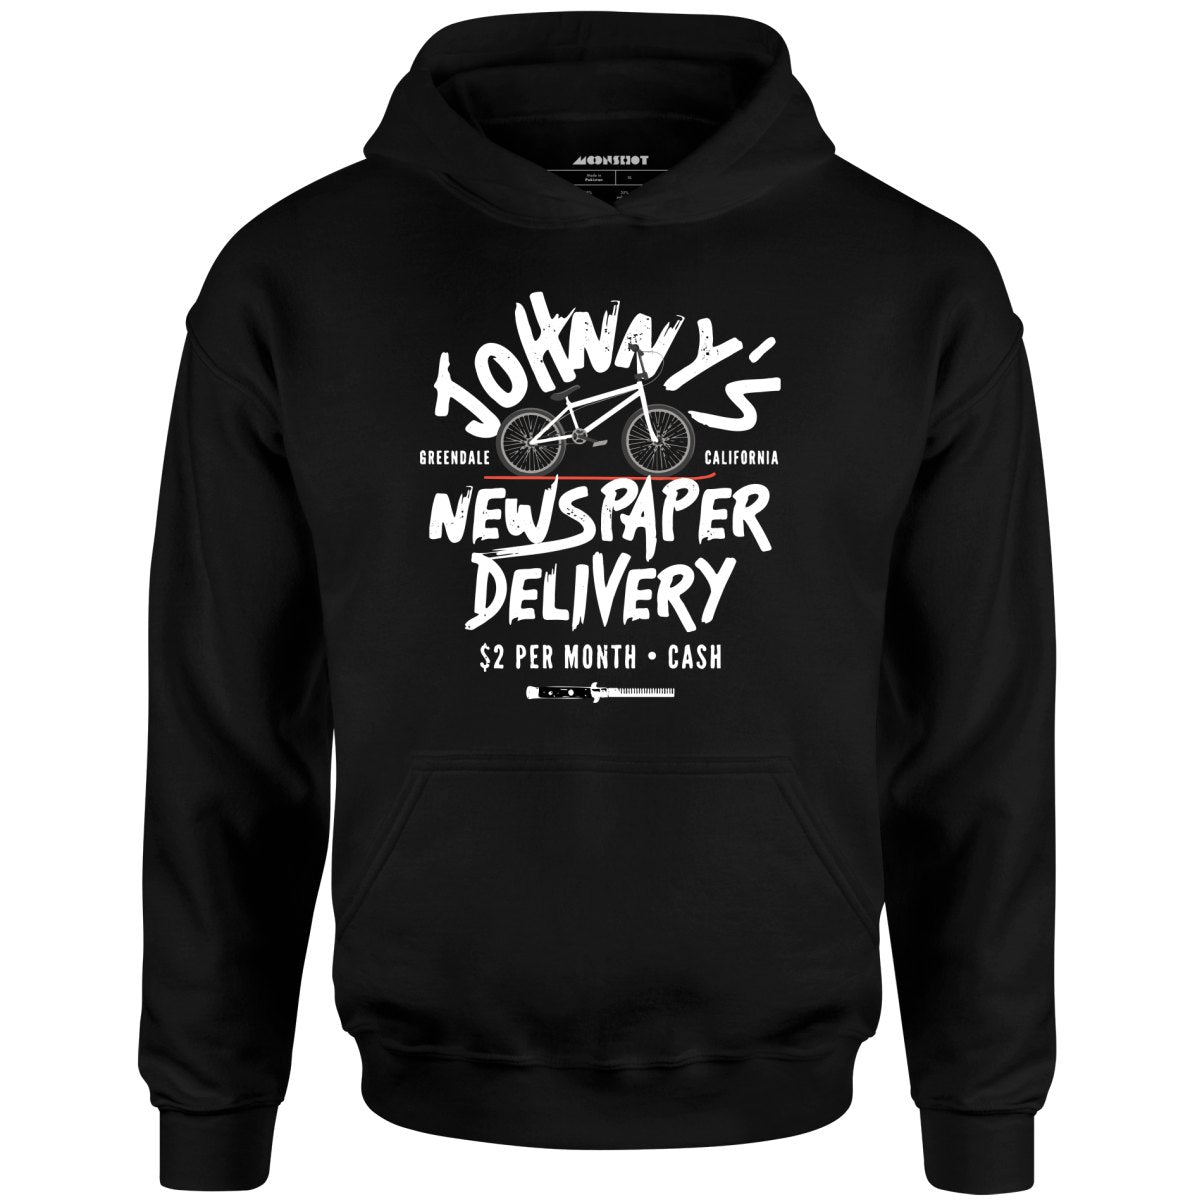 Johnny's Newspaper Delivery - Unisex Hoodie